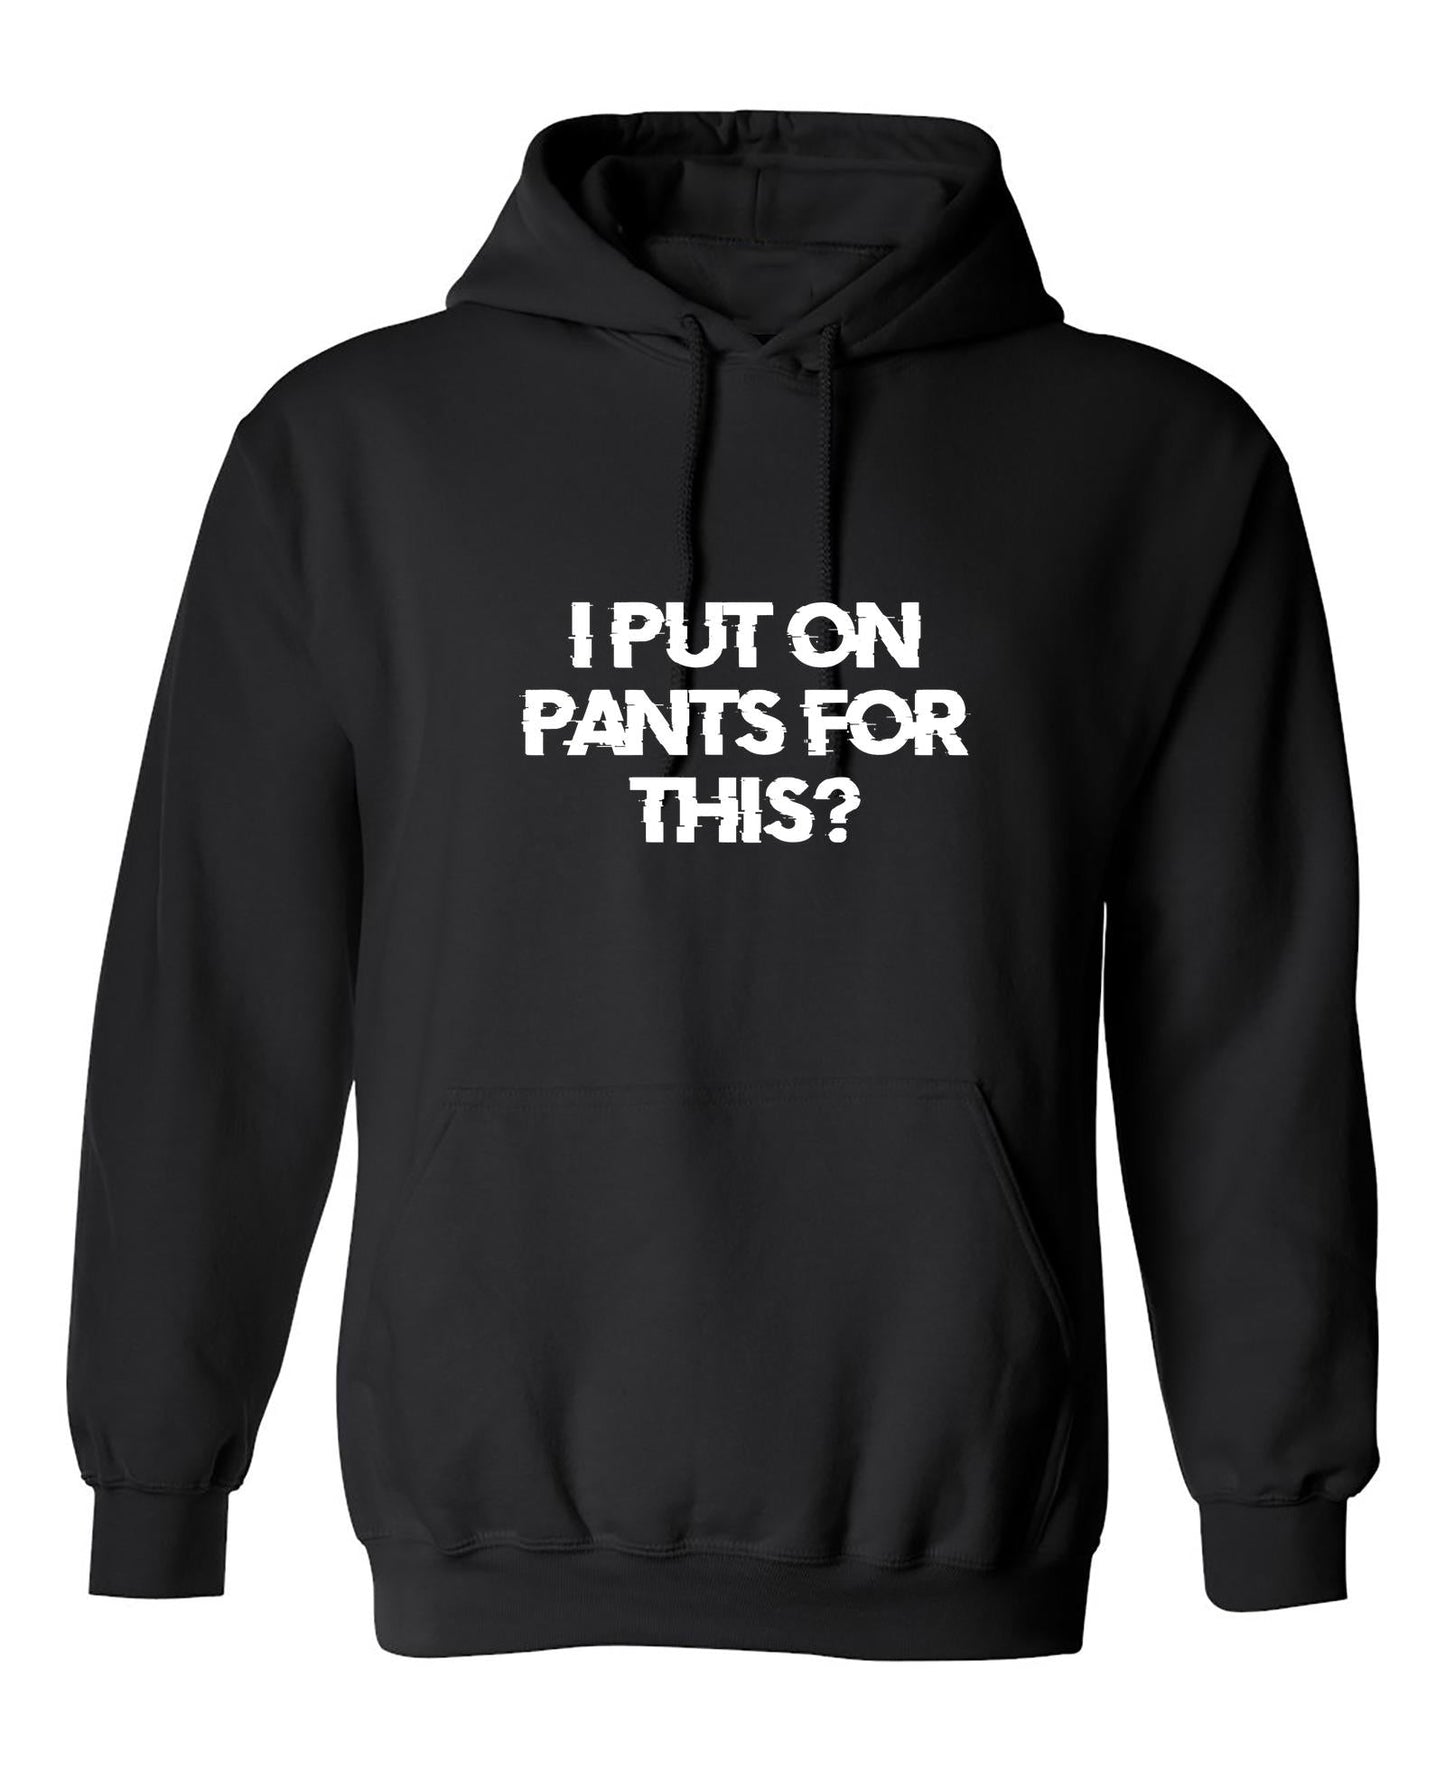 Funny T-Shirts design "I Put On Pants For This?"